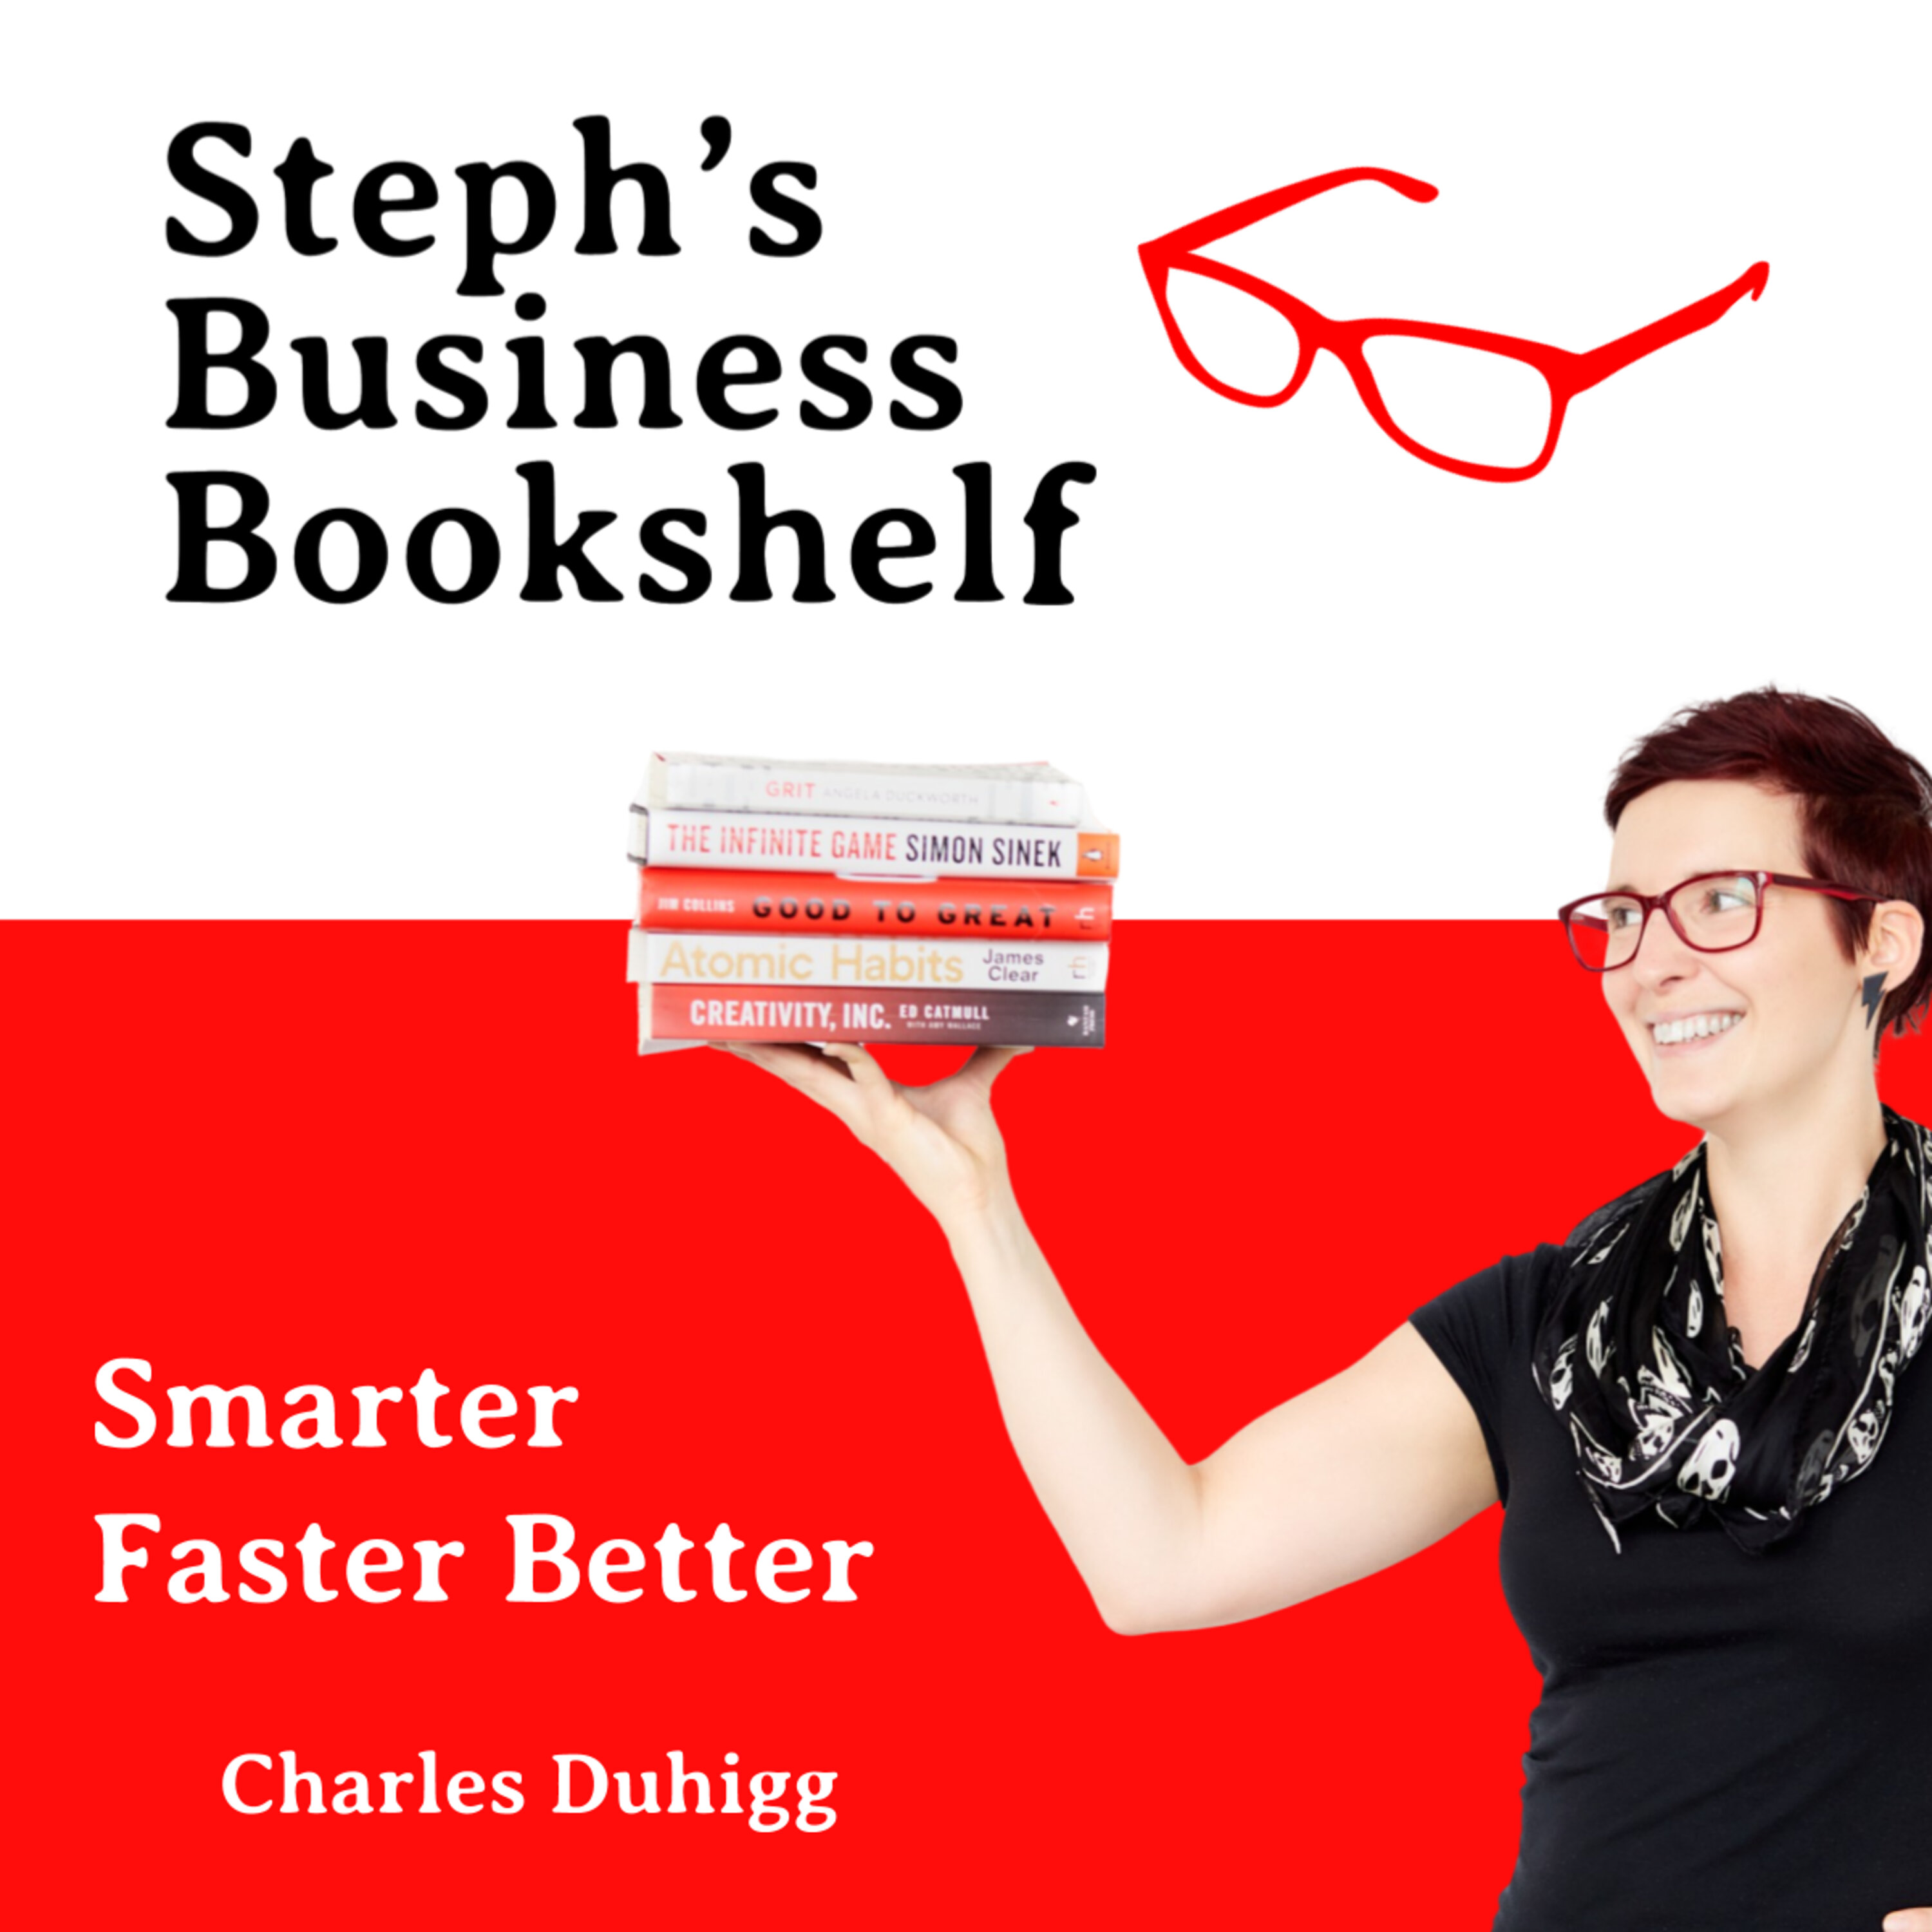 Smarter, Faster, Better by Charles Duhigg: Why you need to embrace control but relinquish certainty Image